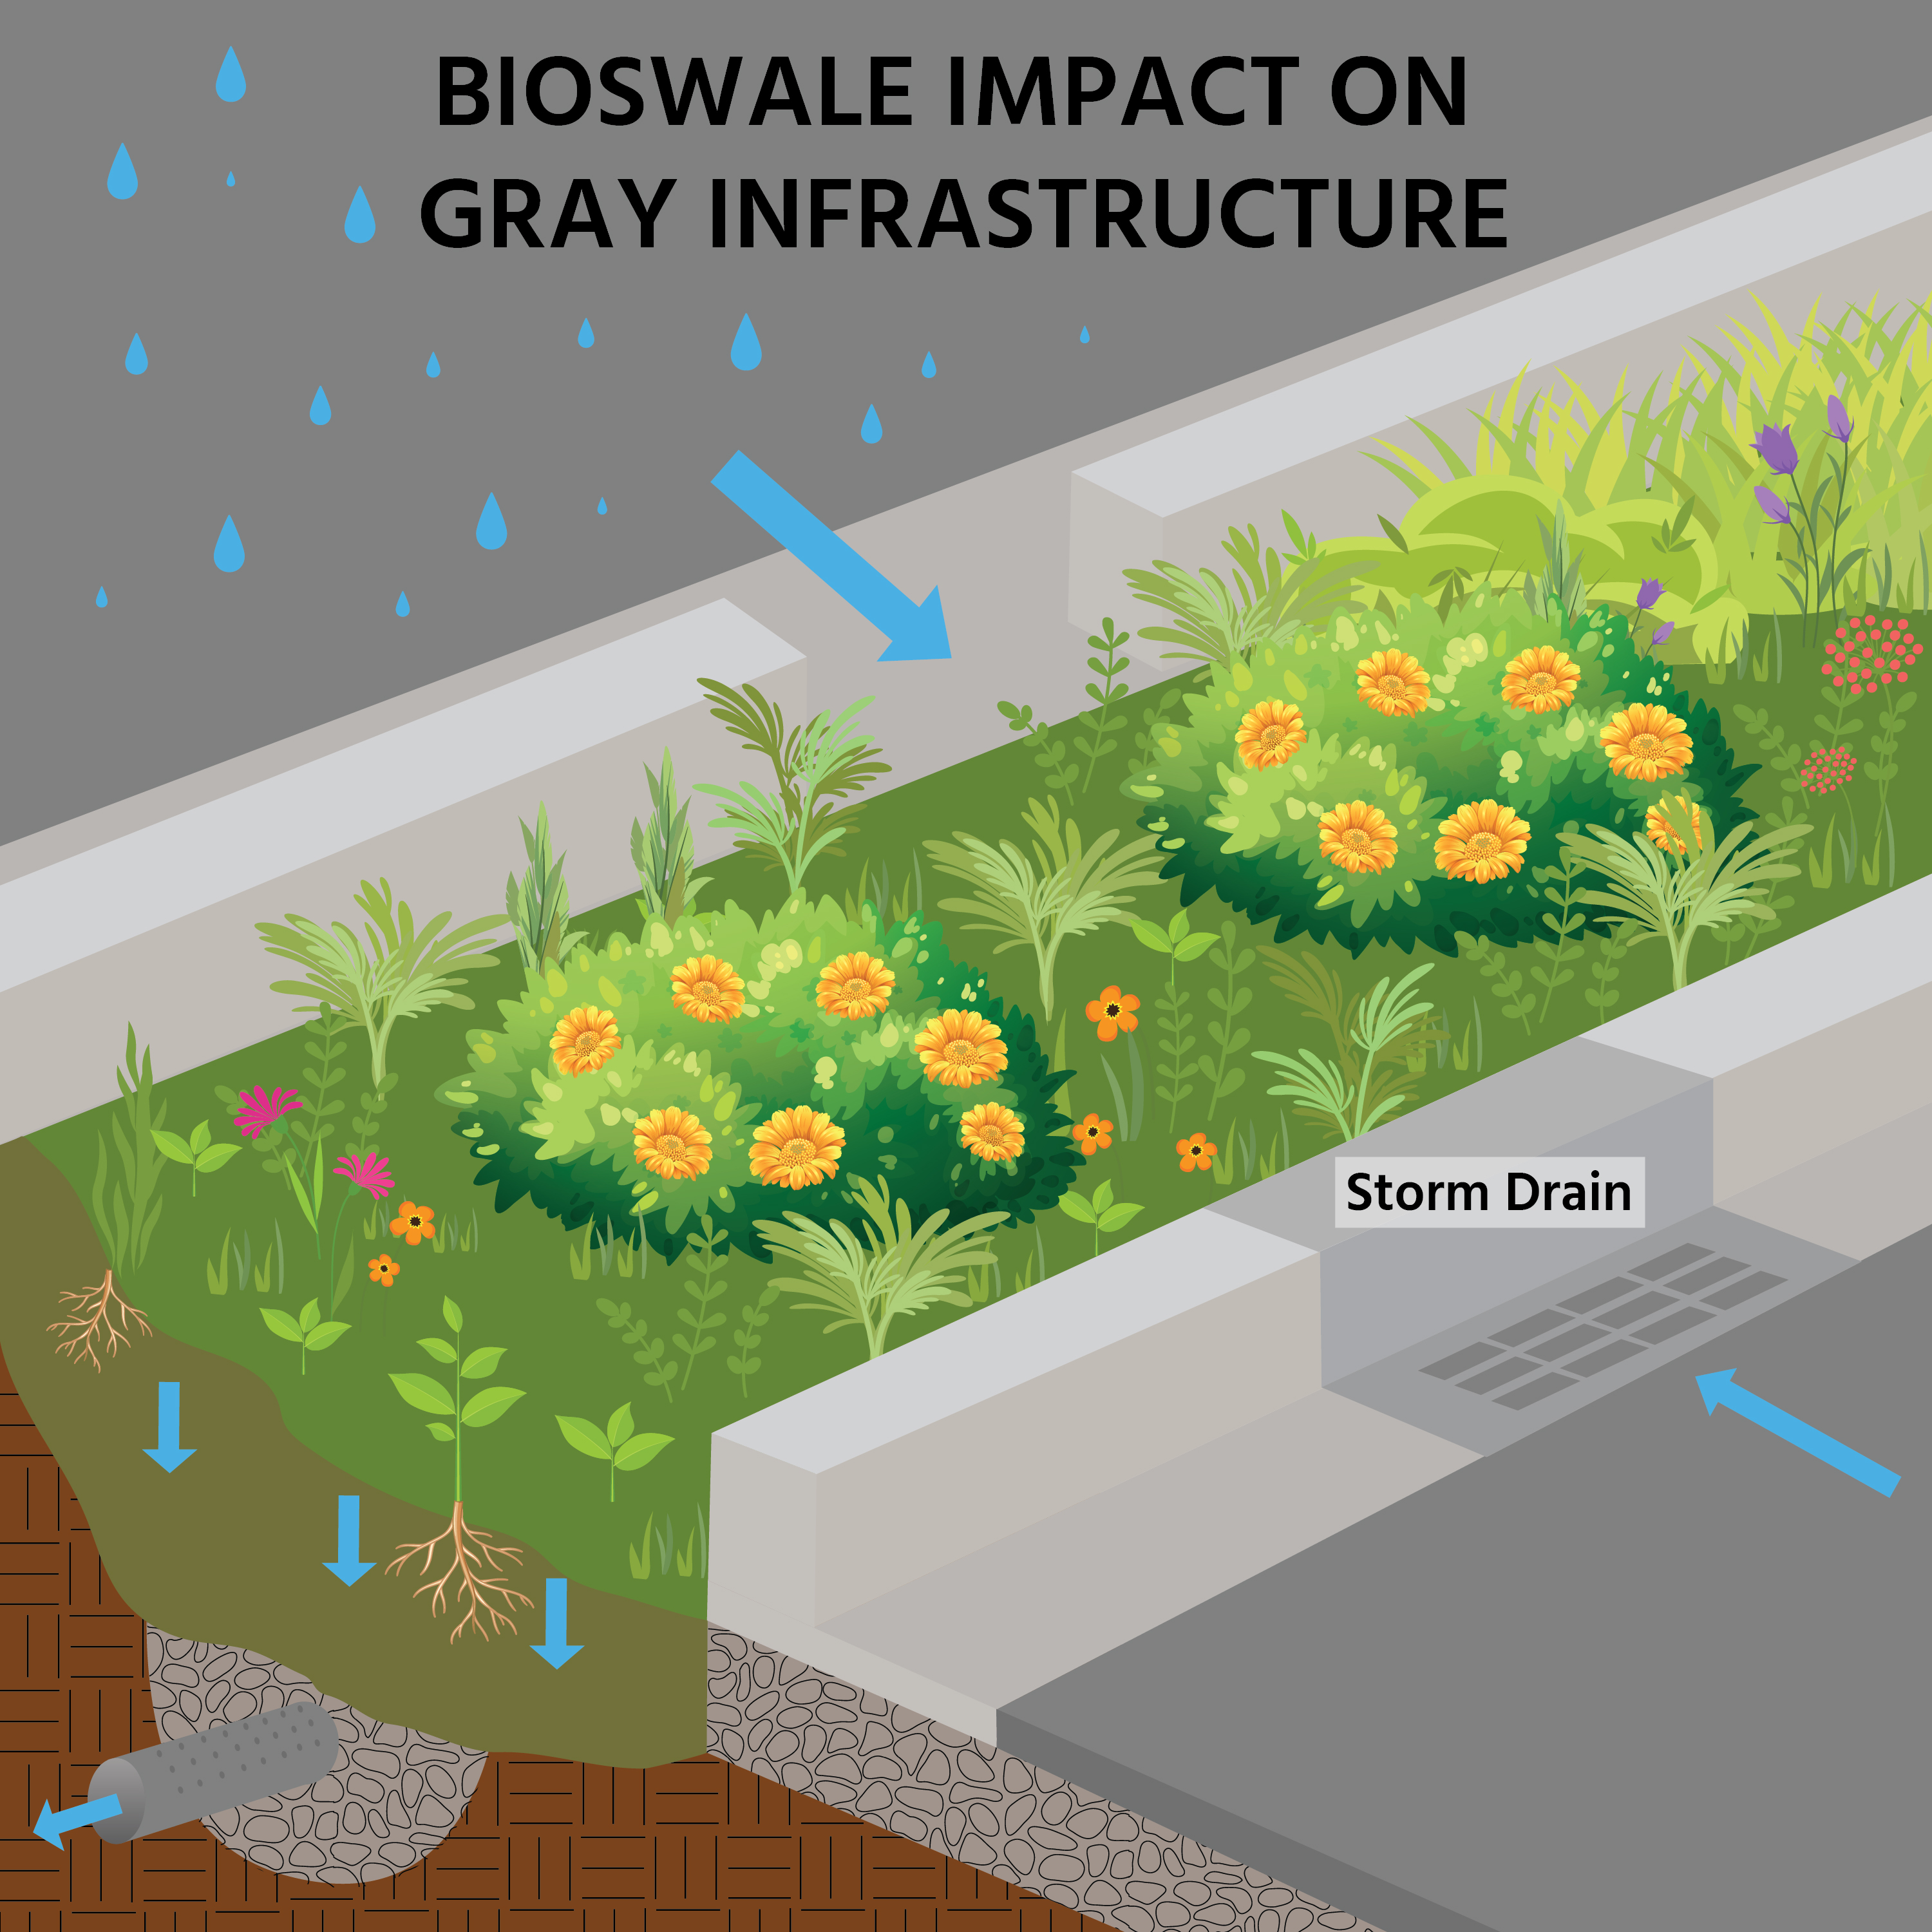 Educational illustration demonstrating how bioswales filter water before entering storm drains - bioswale impact on gray infrastructure